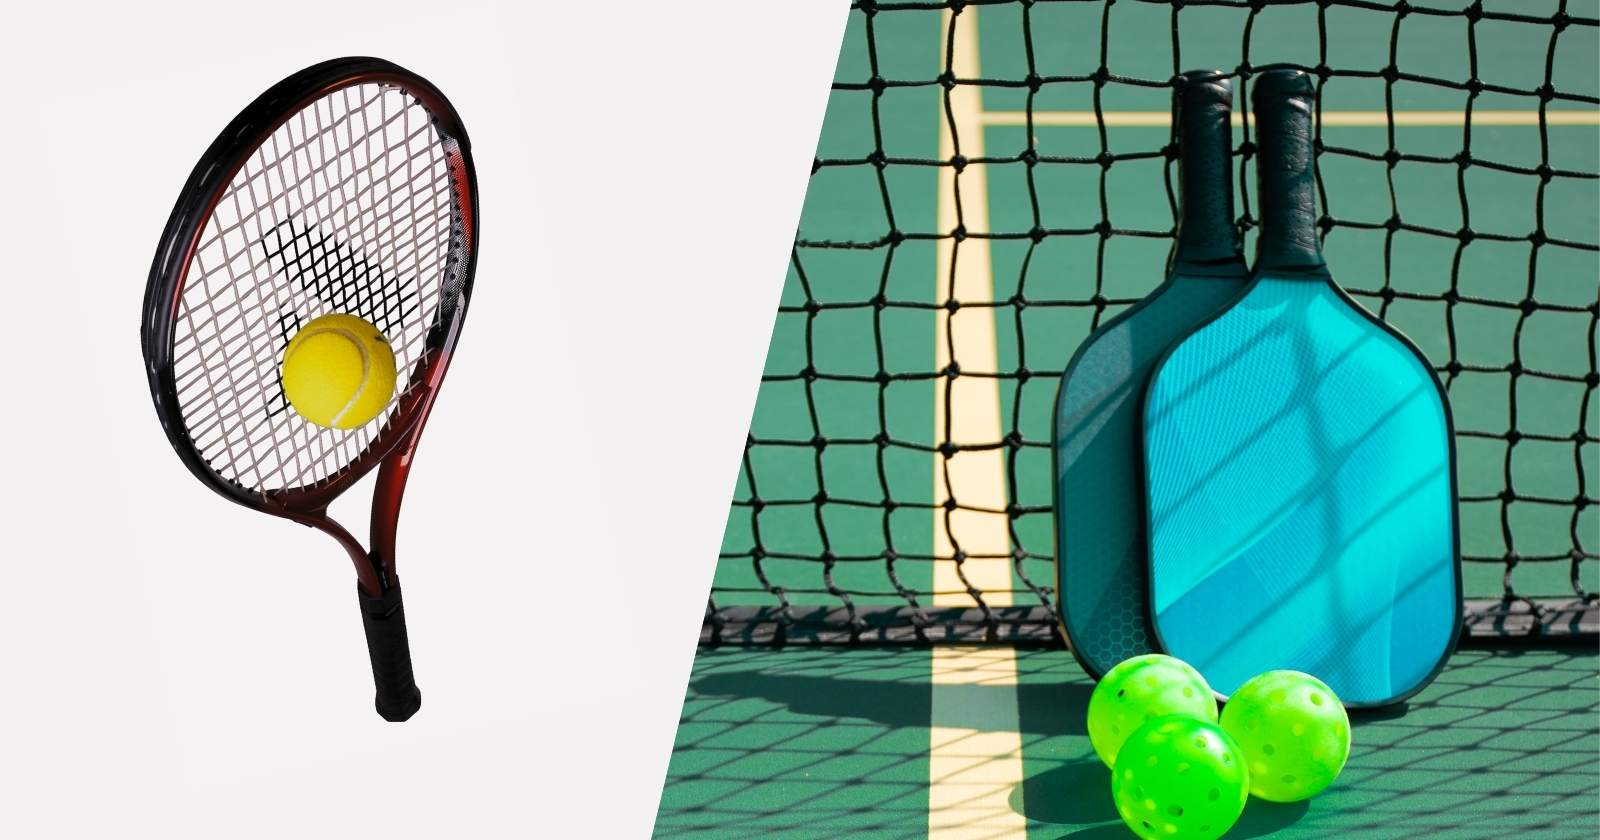 Pickleball vs Tennis - Differences and Similarities